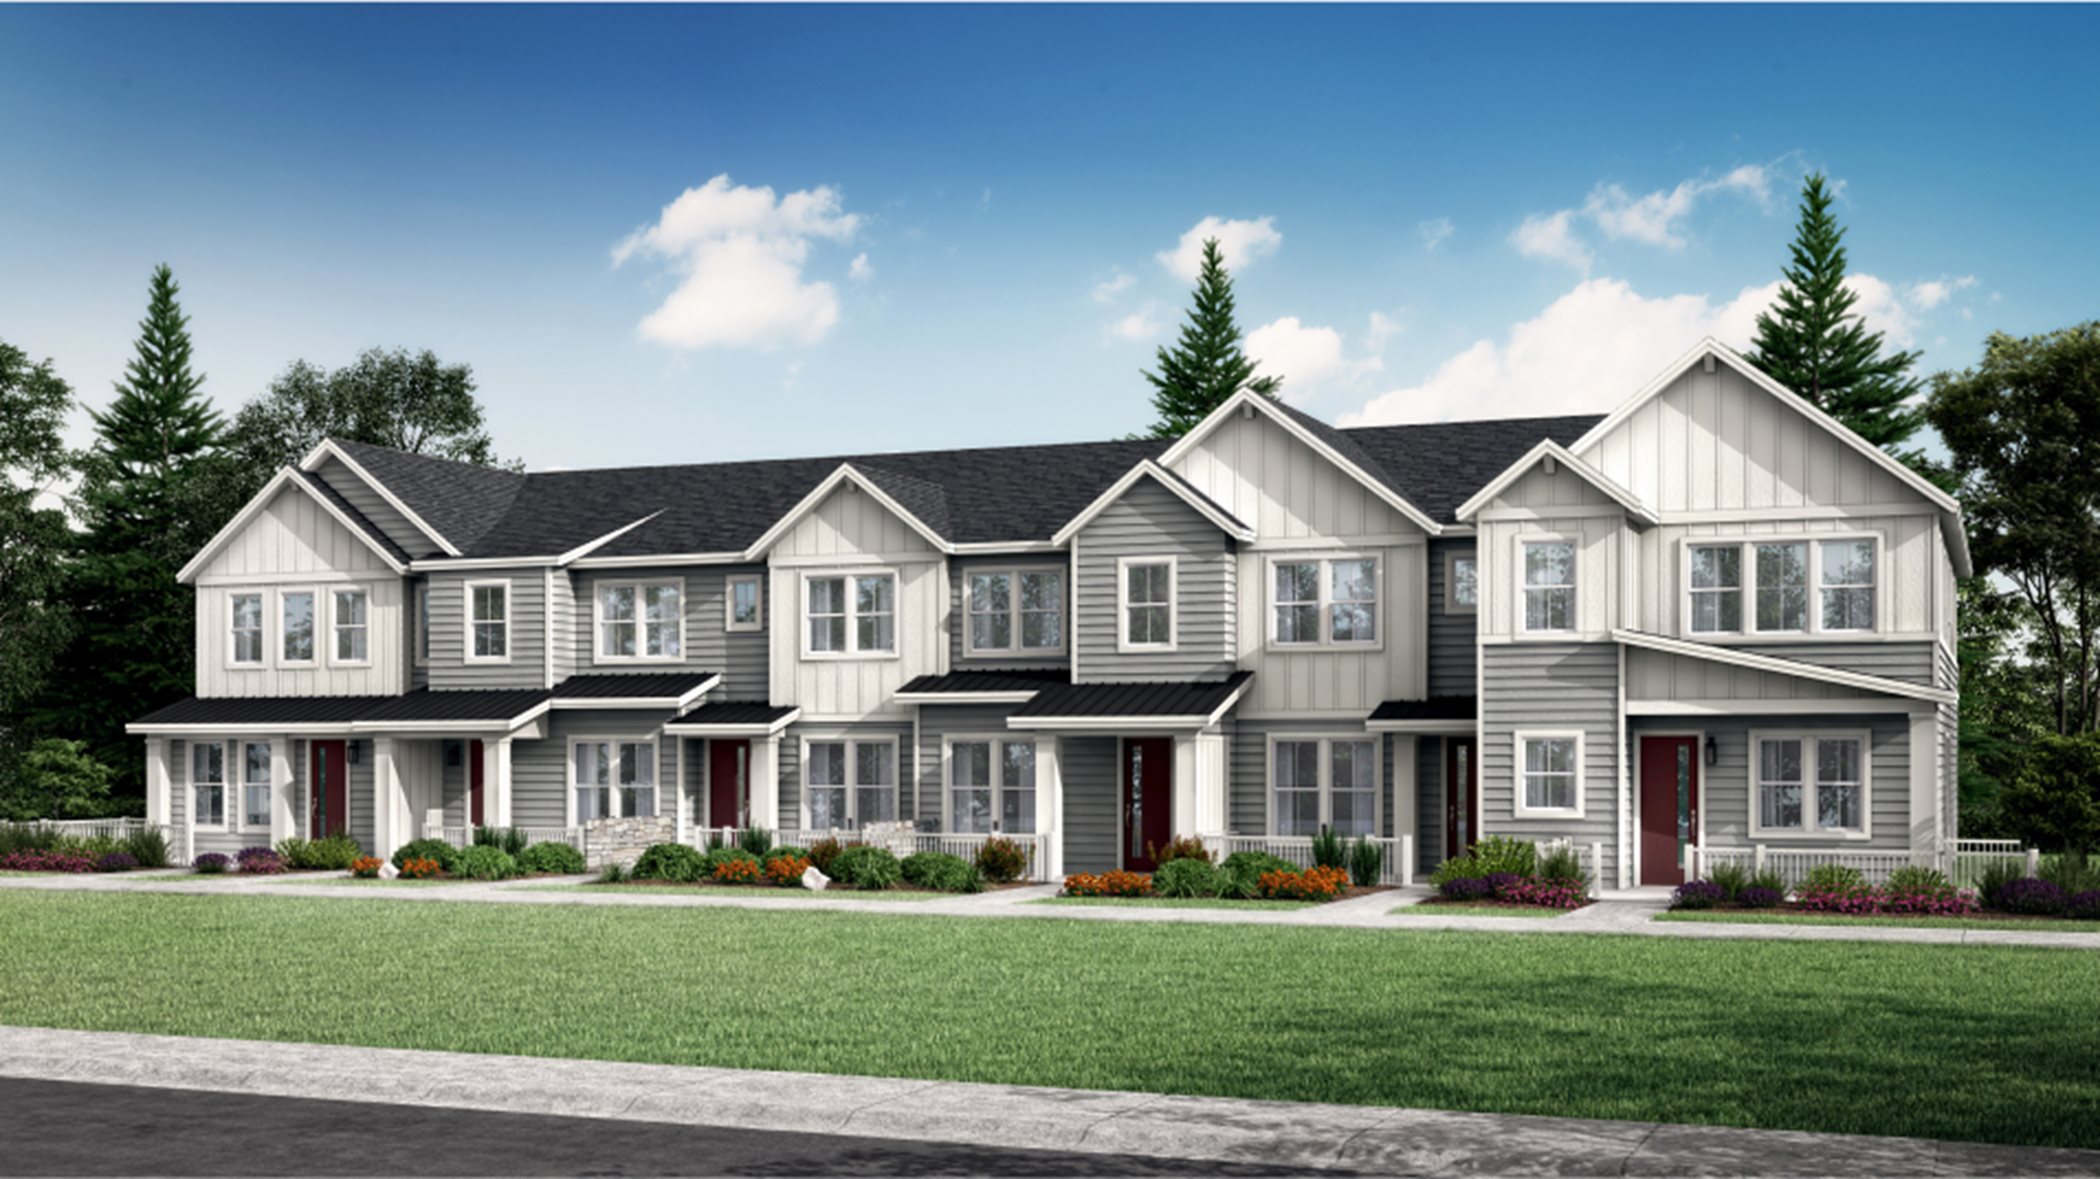 The Parkside Townhomes - Green Gables Plan 301 Contemporary Farmhouse